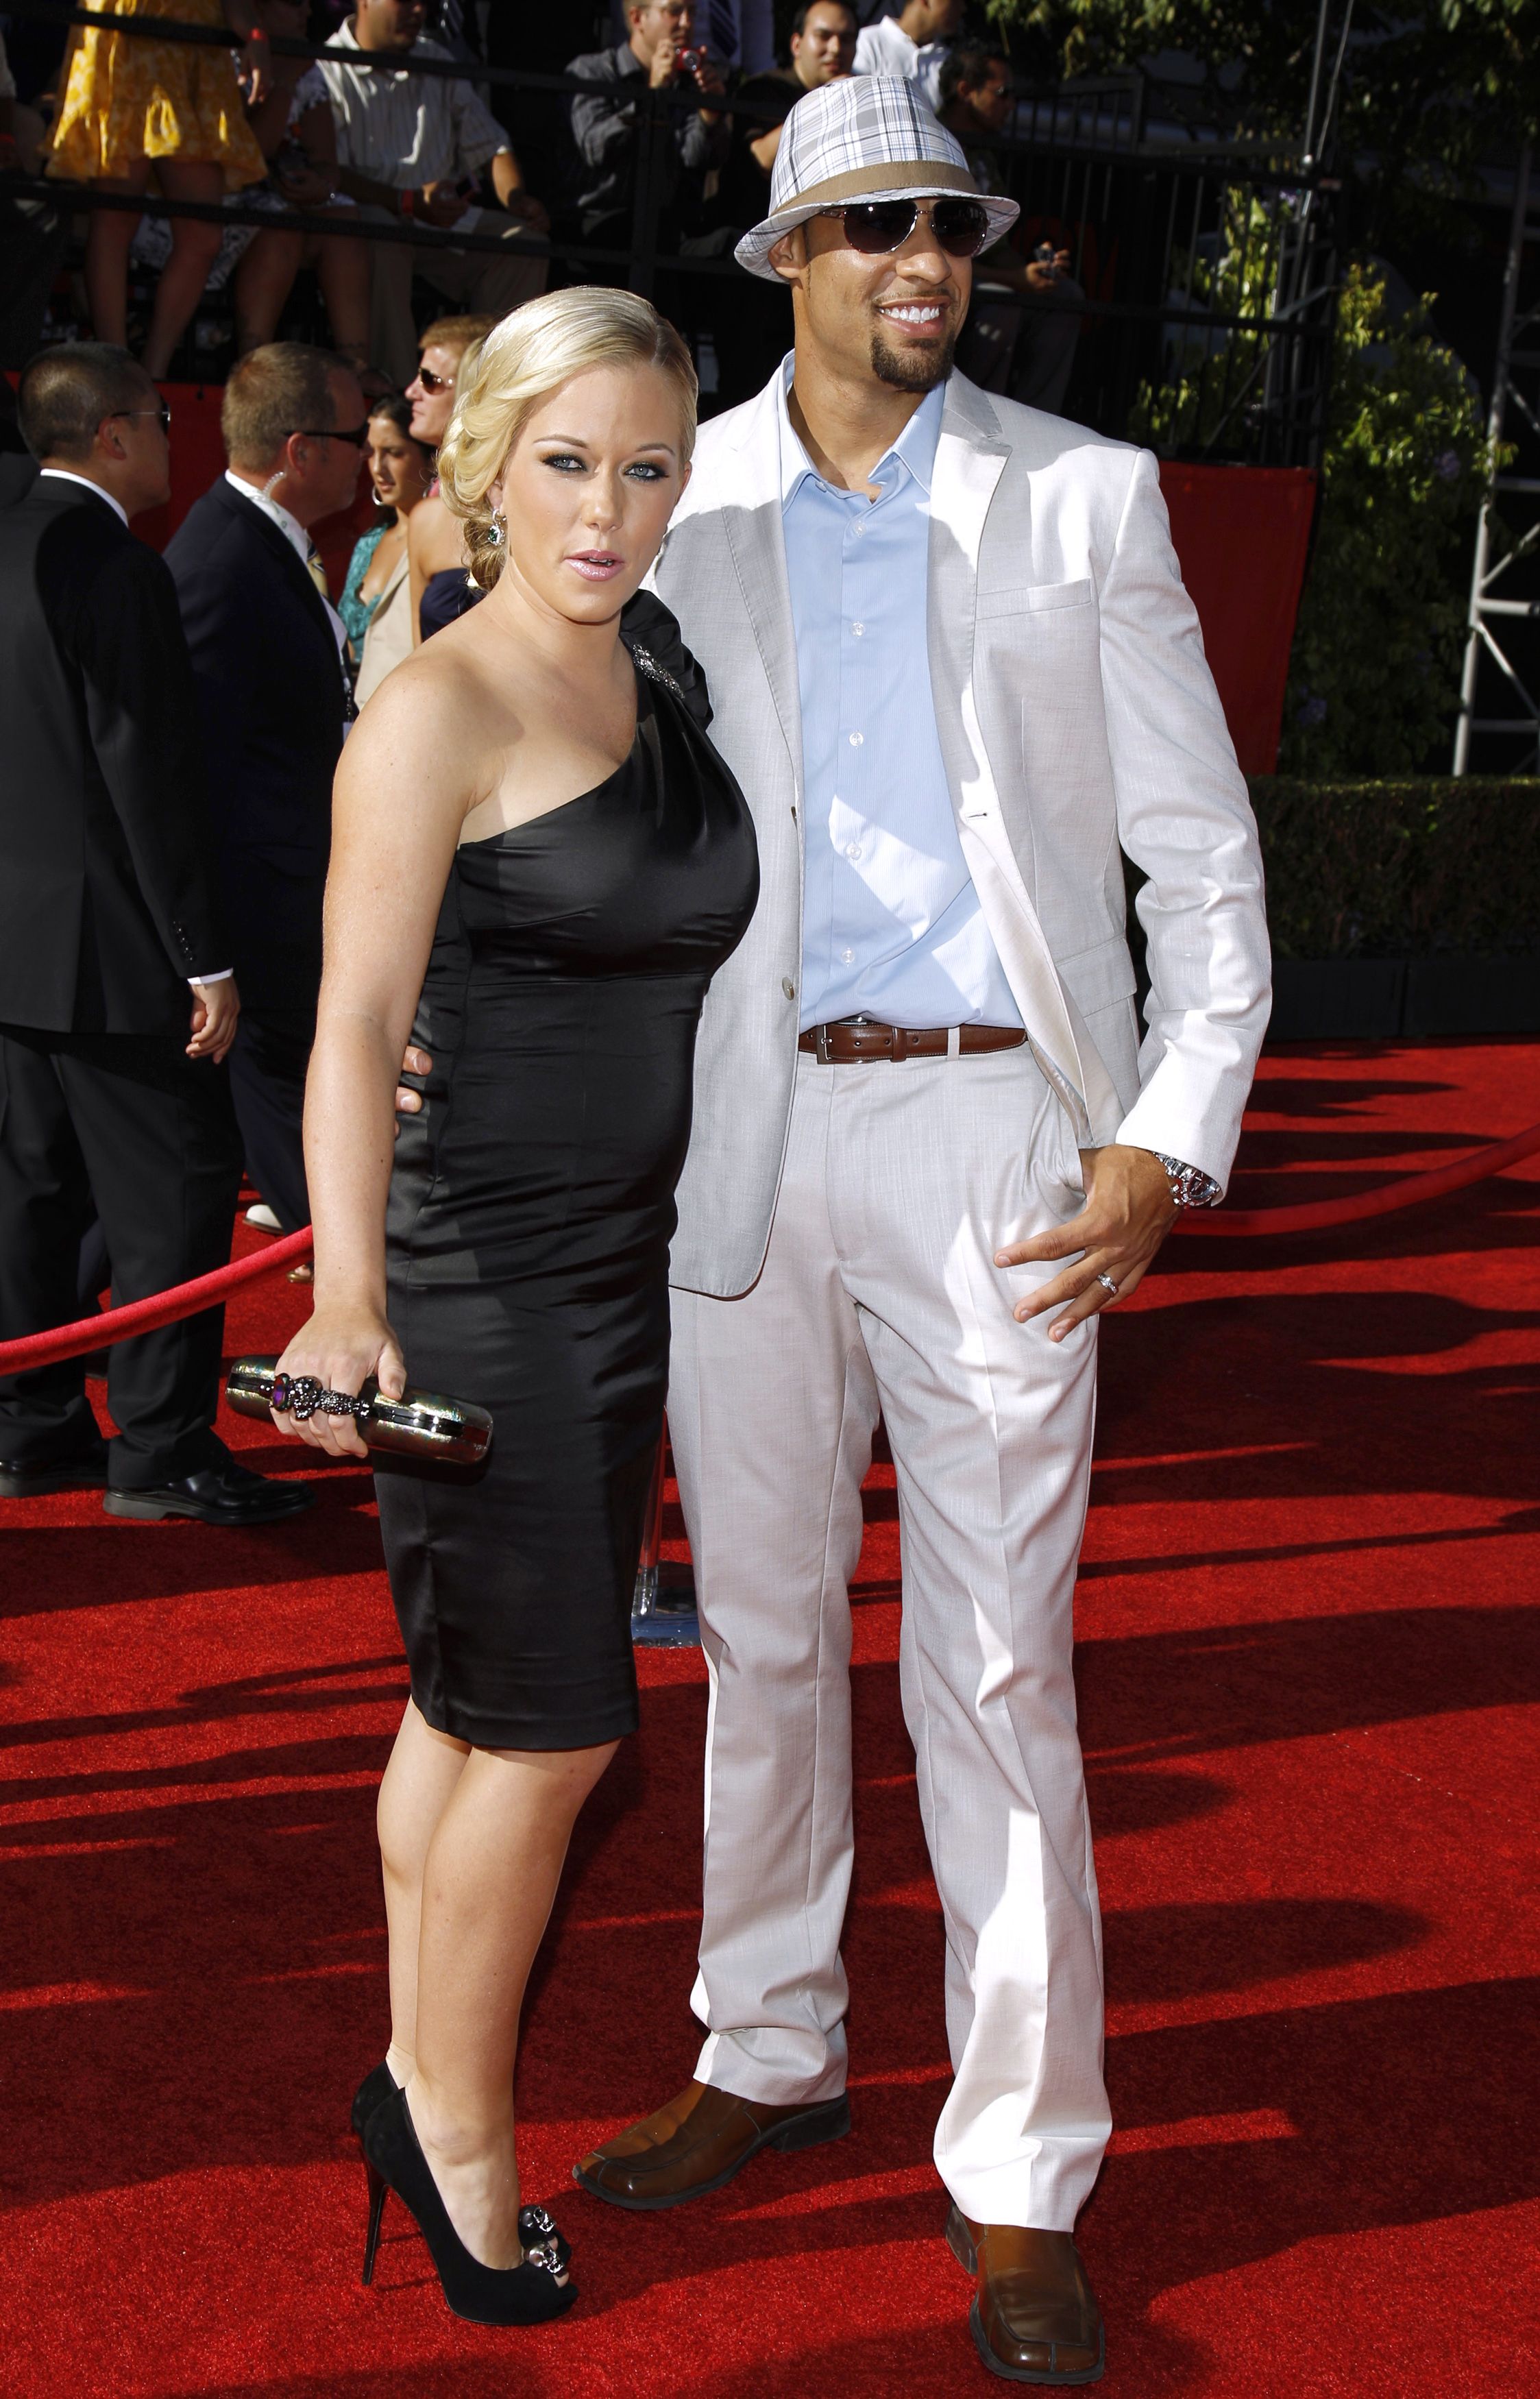 Kendra Wilkinson Hank Baskett Back Together Divorce Reportedly Called Off Amid Cheating